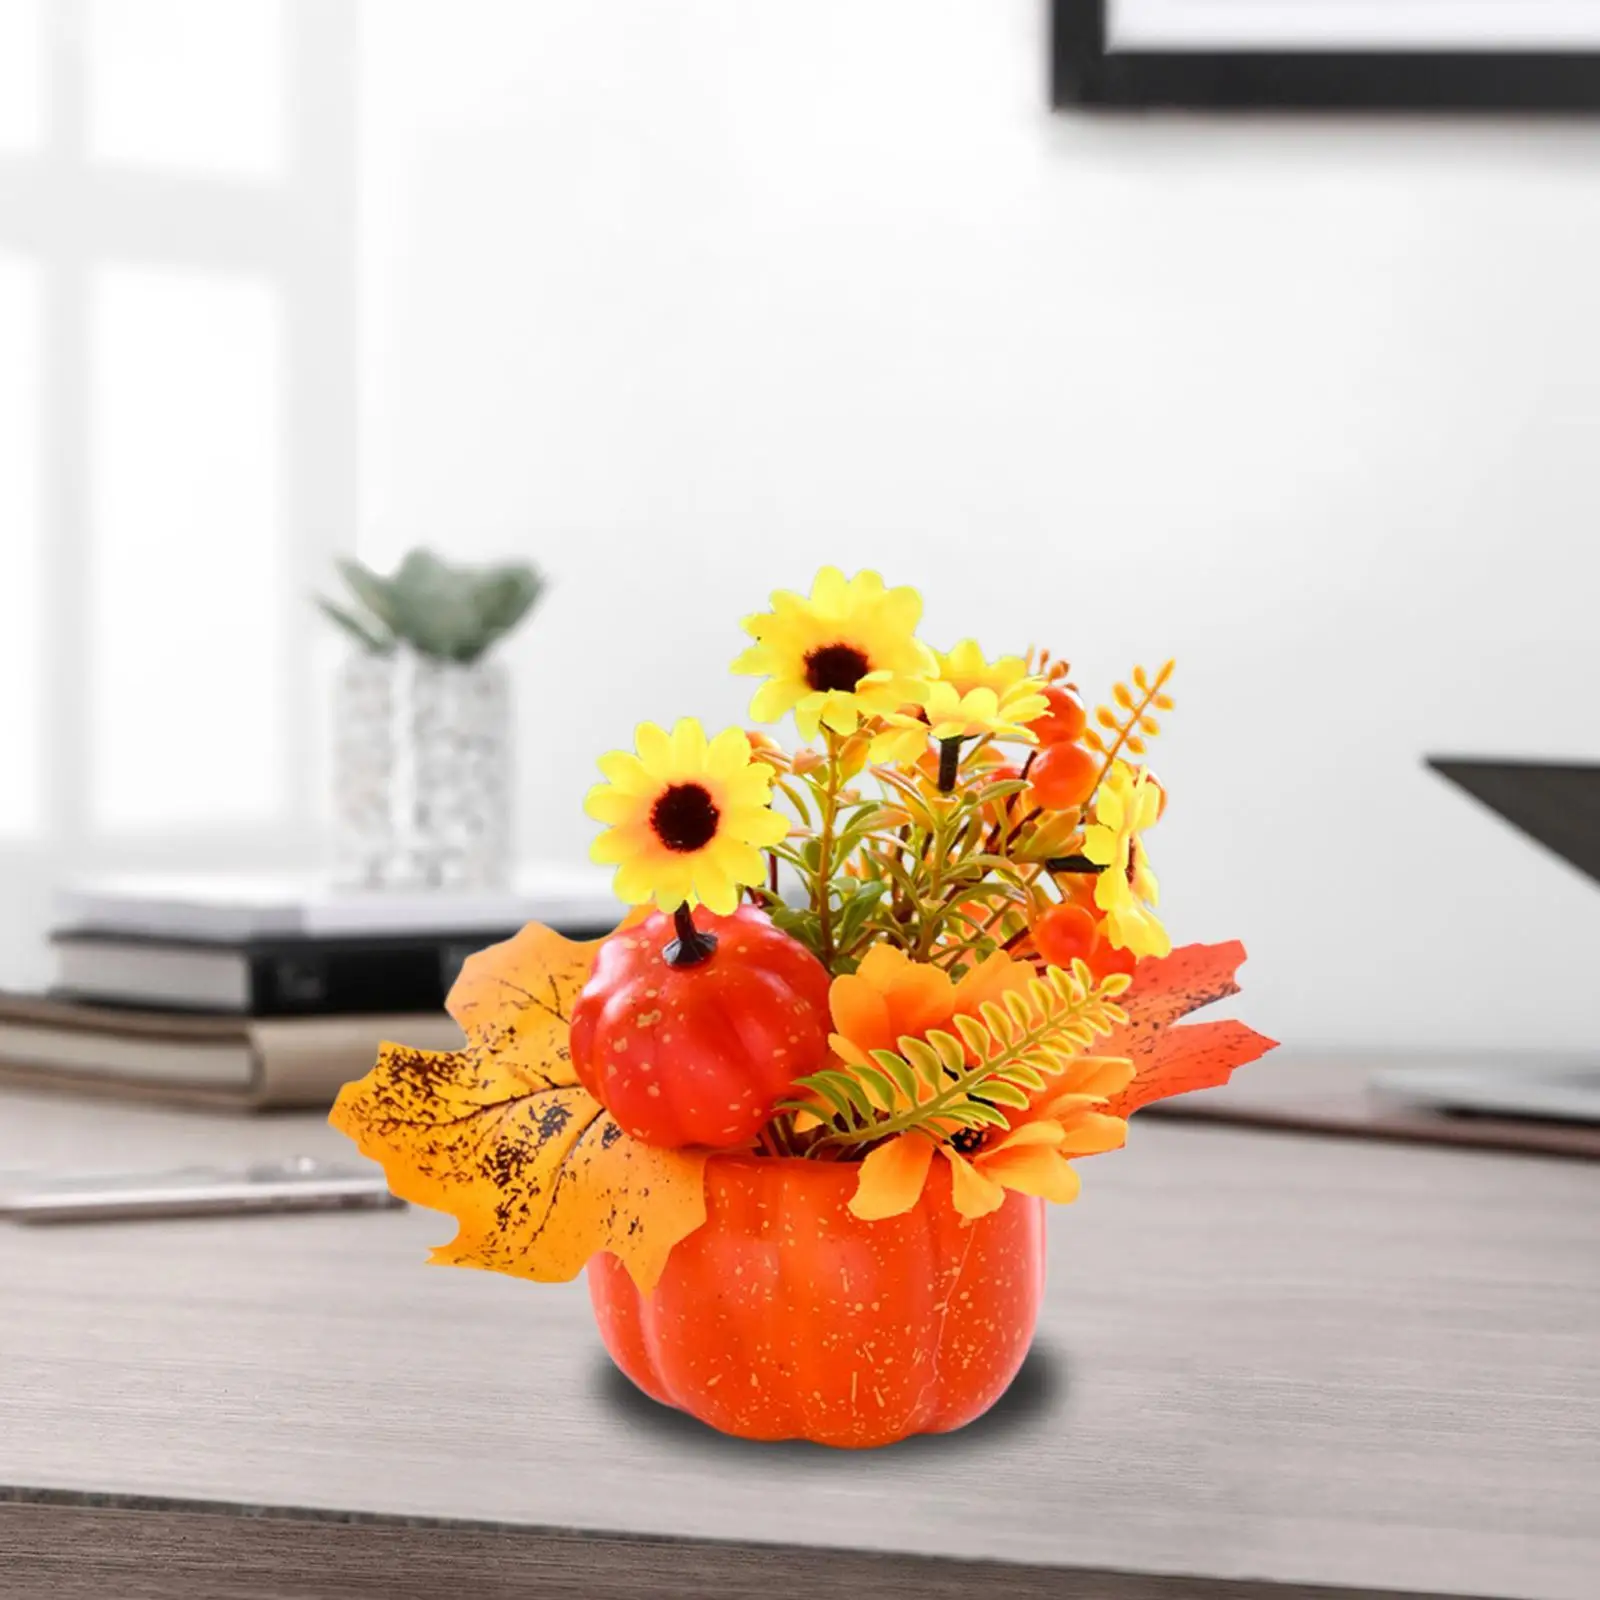 Pumpkin with Flowers Thanksgiving Decoration Party Decor Ornaments Table